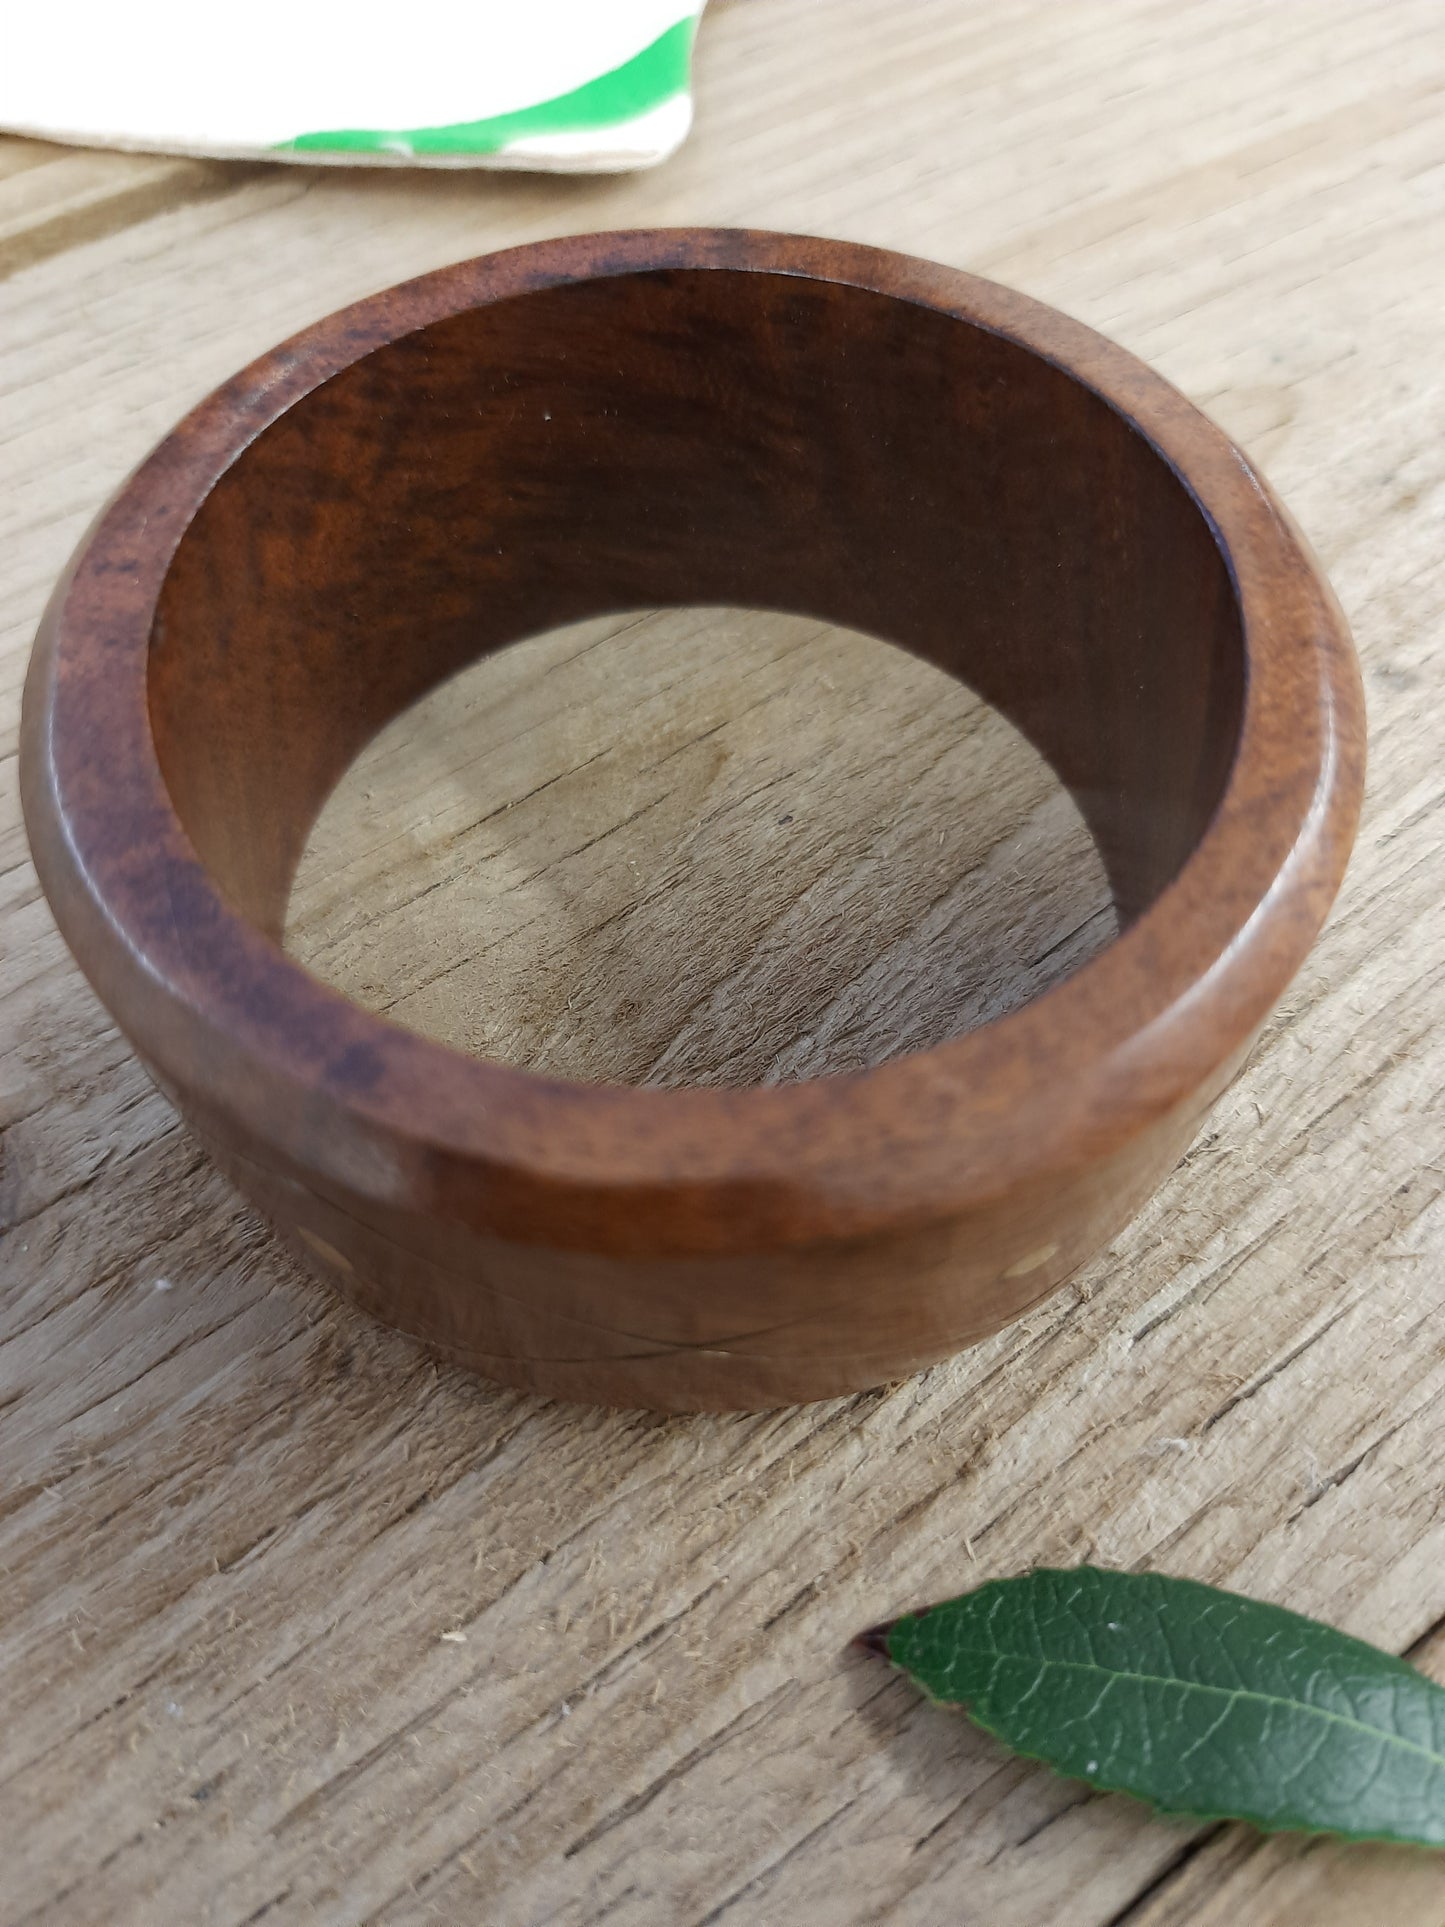 Fair Trade Jewelry | Wooden Bangle | Sustainable Jewellery UK | Eco Conscious